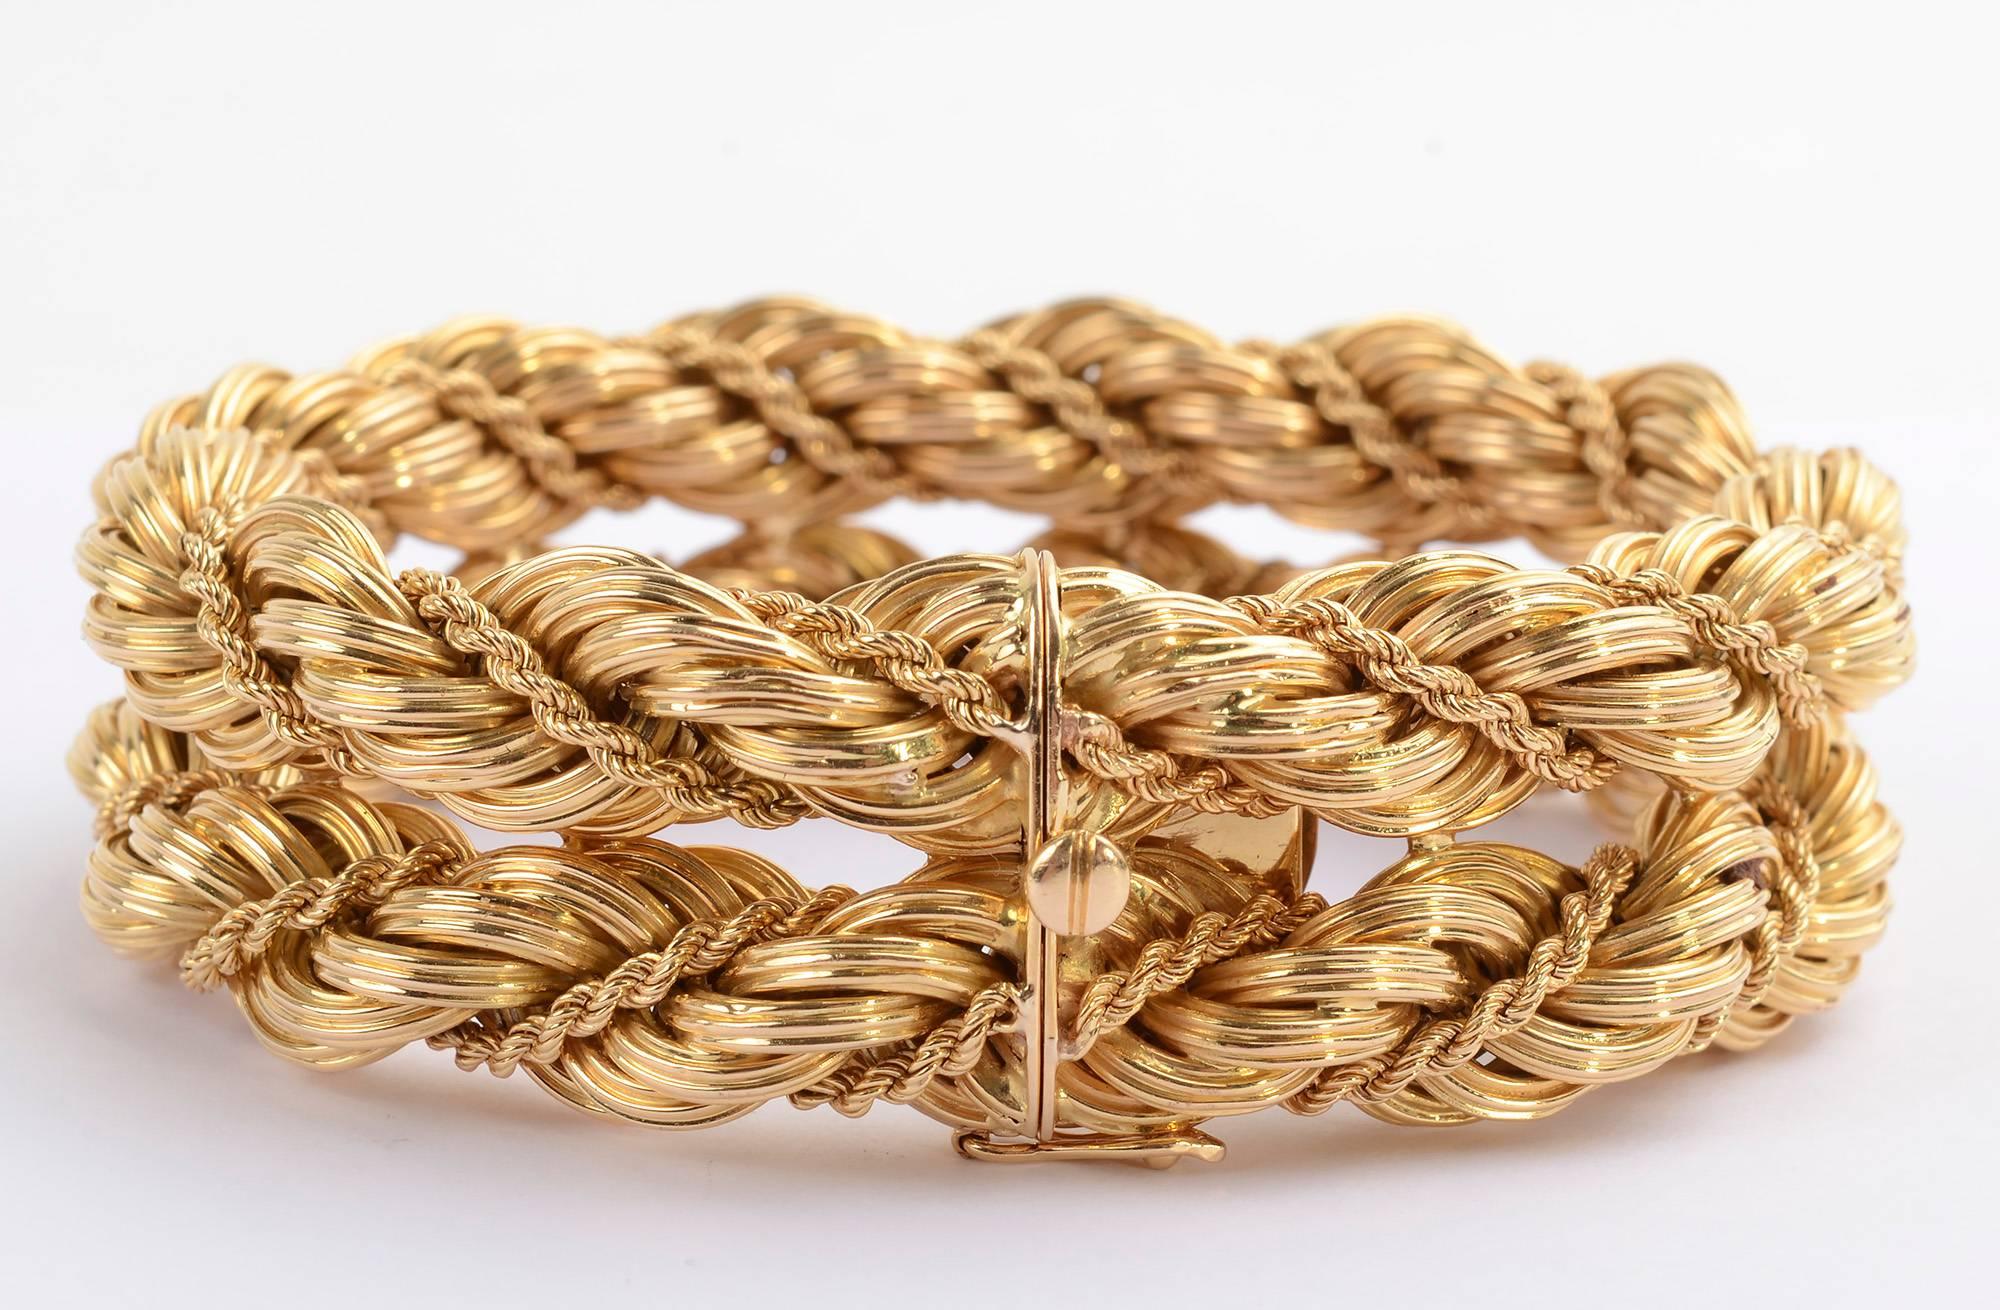 Chunky Tiffany 18 karat gold bracelet consisting of two connected rows of twisted gold. Each row has a thick twist around which is a much thinner strand of twisted gold. The bracelet measures 8 1/8 inches in length which may be misleading. Because